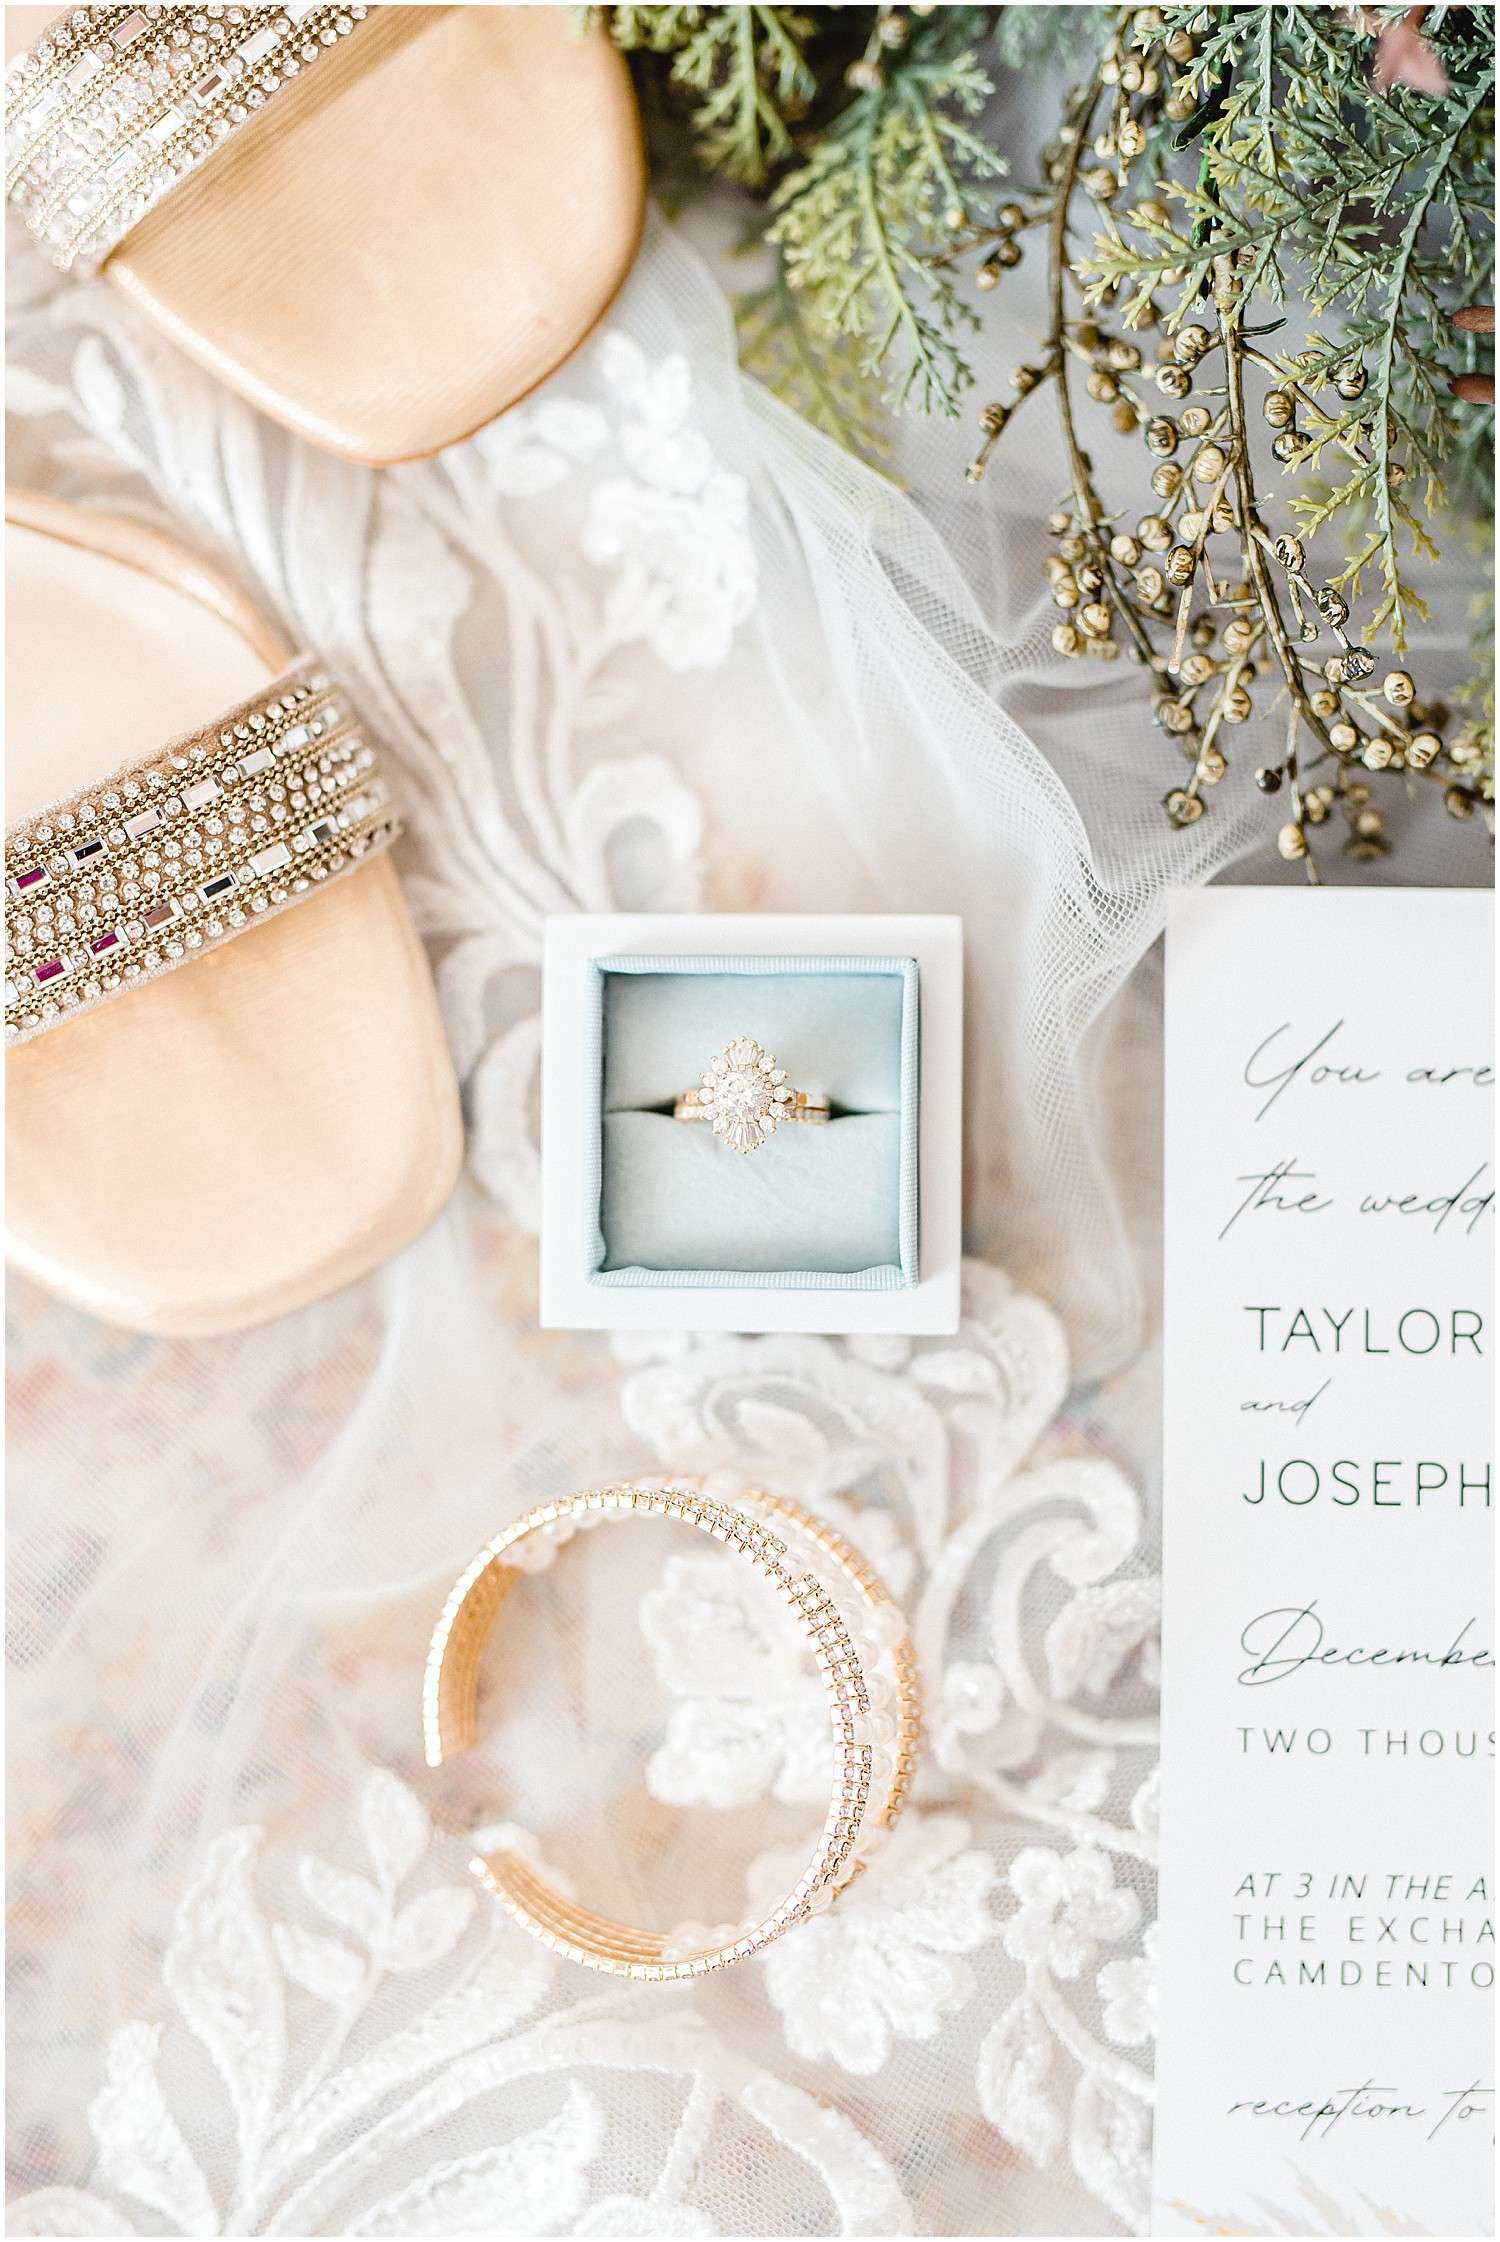 Wedding day flat lay details featuring gold jewelry